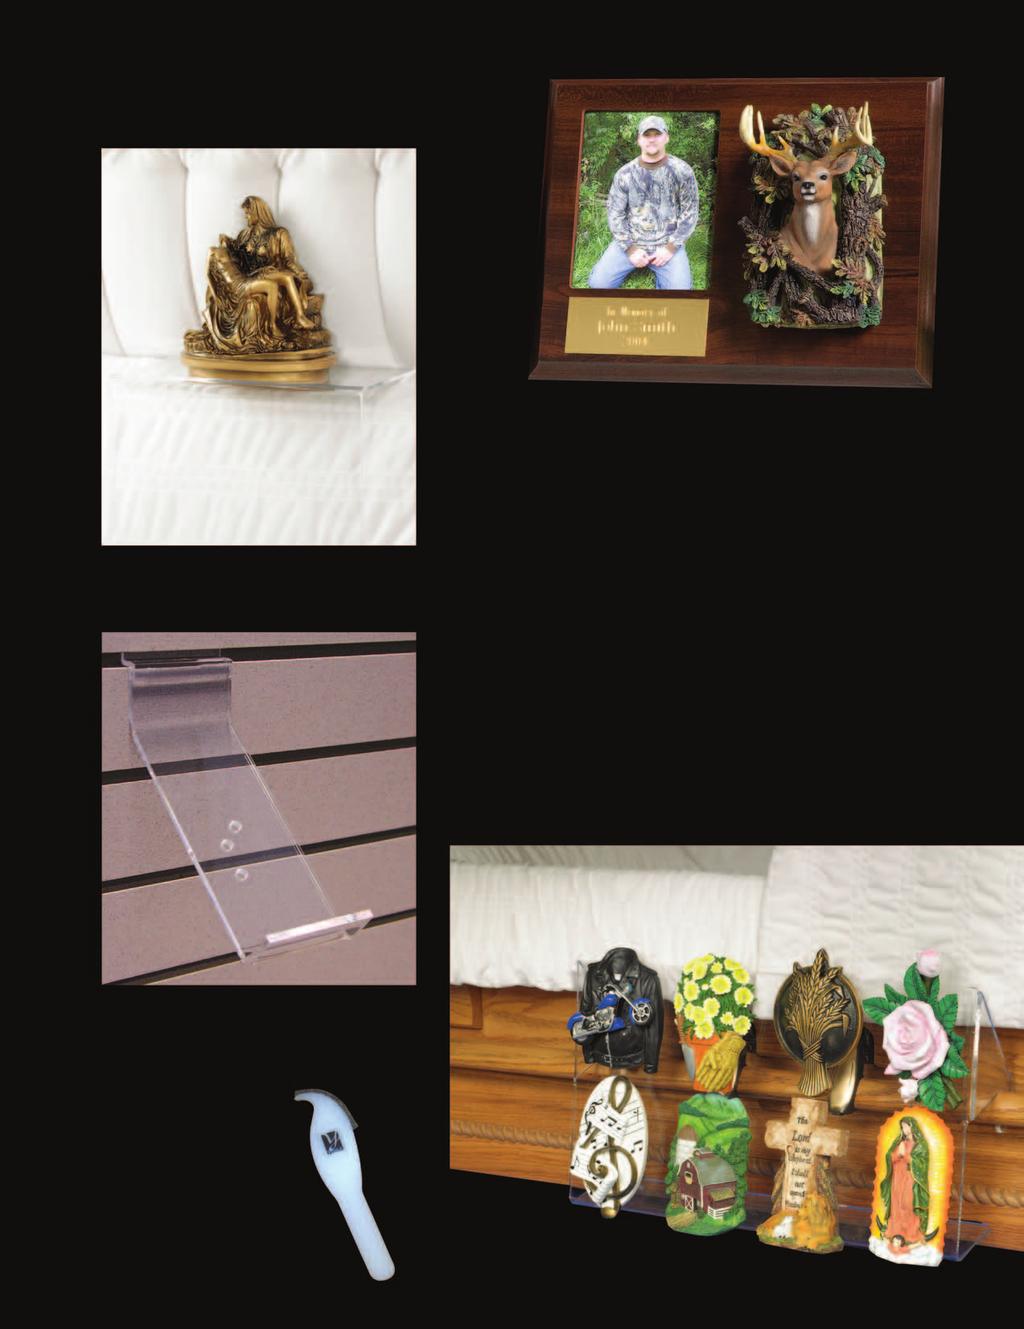 ACCESSORIES Family Keepsake Plaque Pieta Display Shelf Acrylic 6031480 (sits inside open casket) This handsome plaque serves as a lasting memento from a funeral where Eternal Reflections corner art